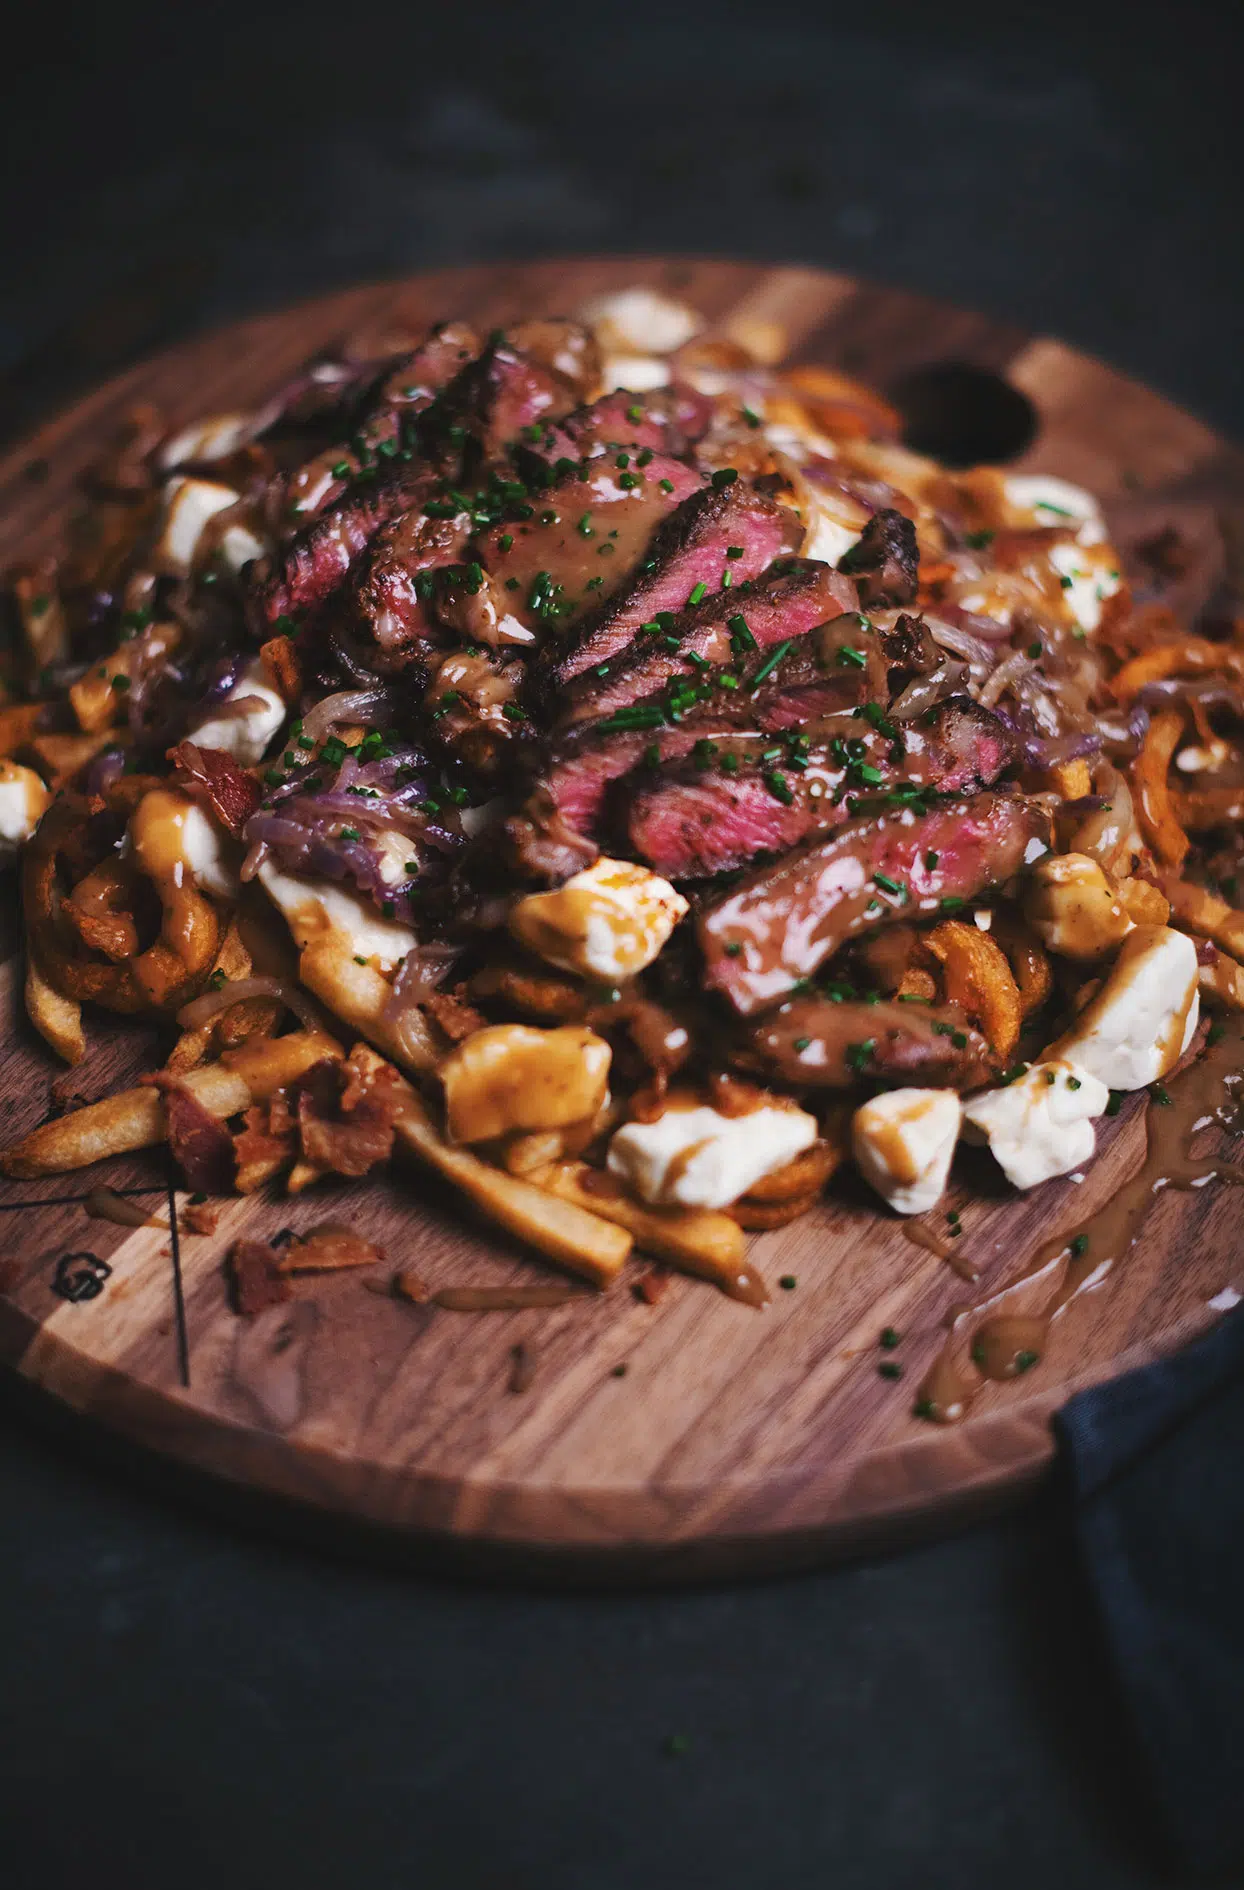 Deluxe poutine with beef ribeye steak, bacon and beer caramelized onions